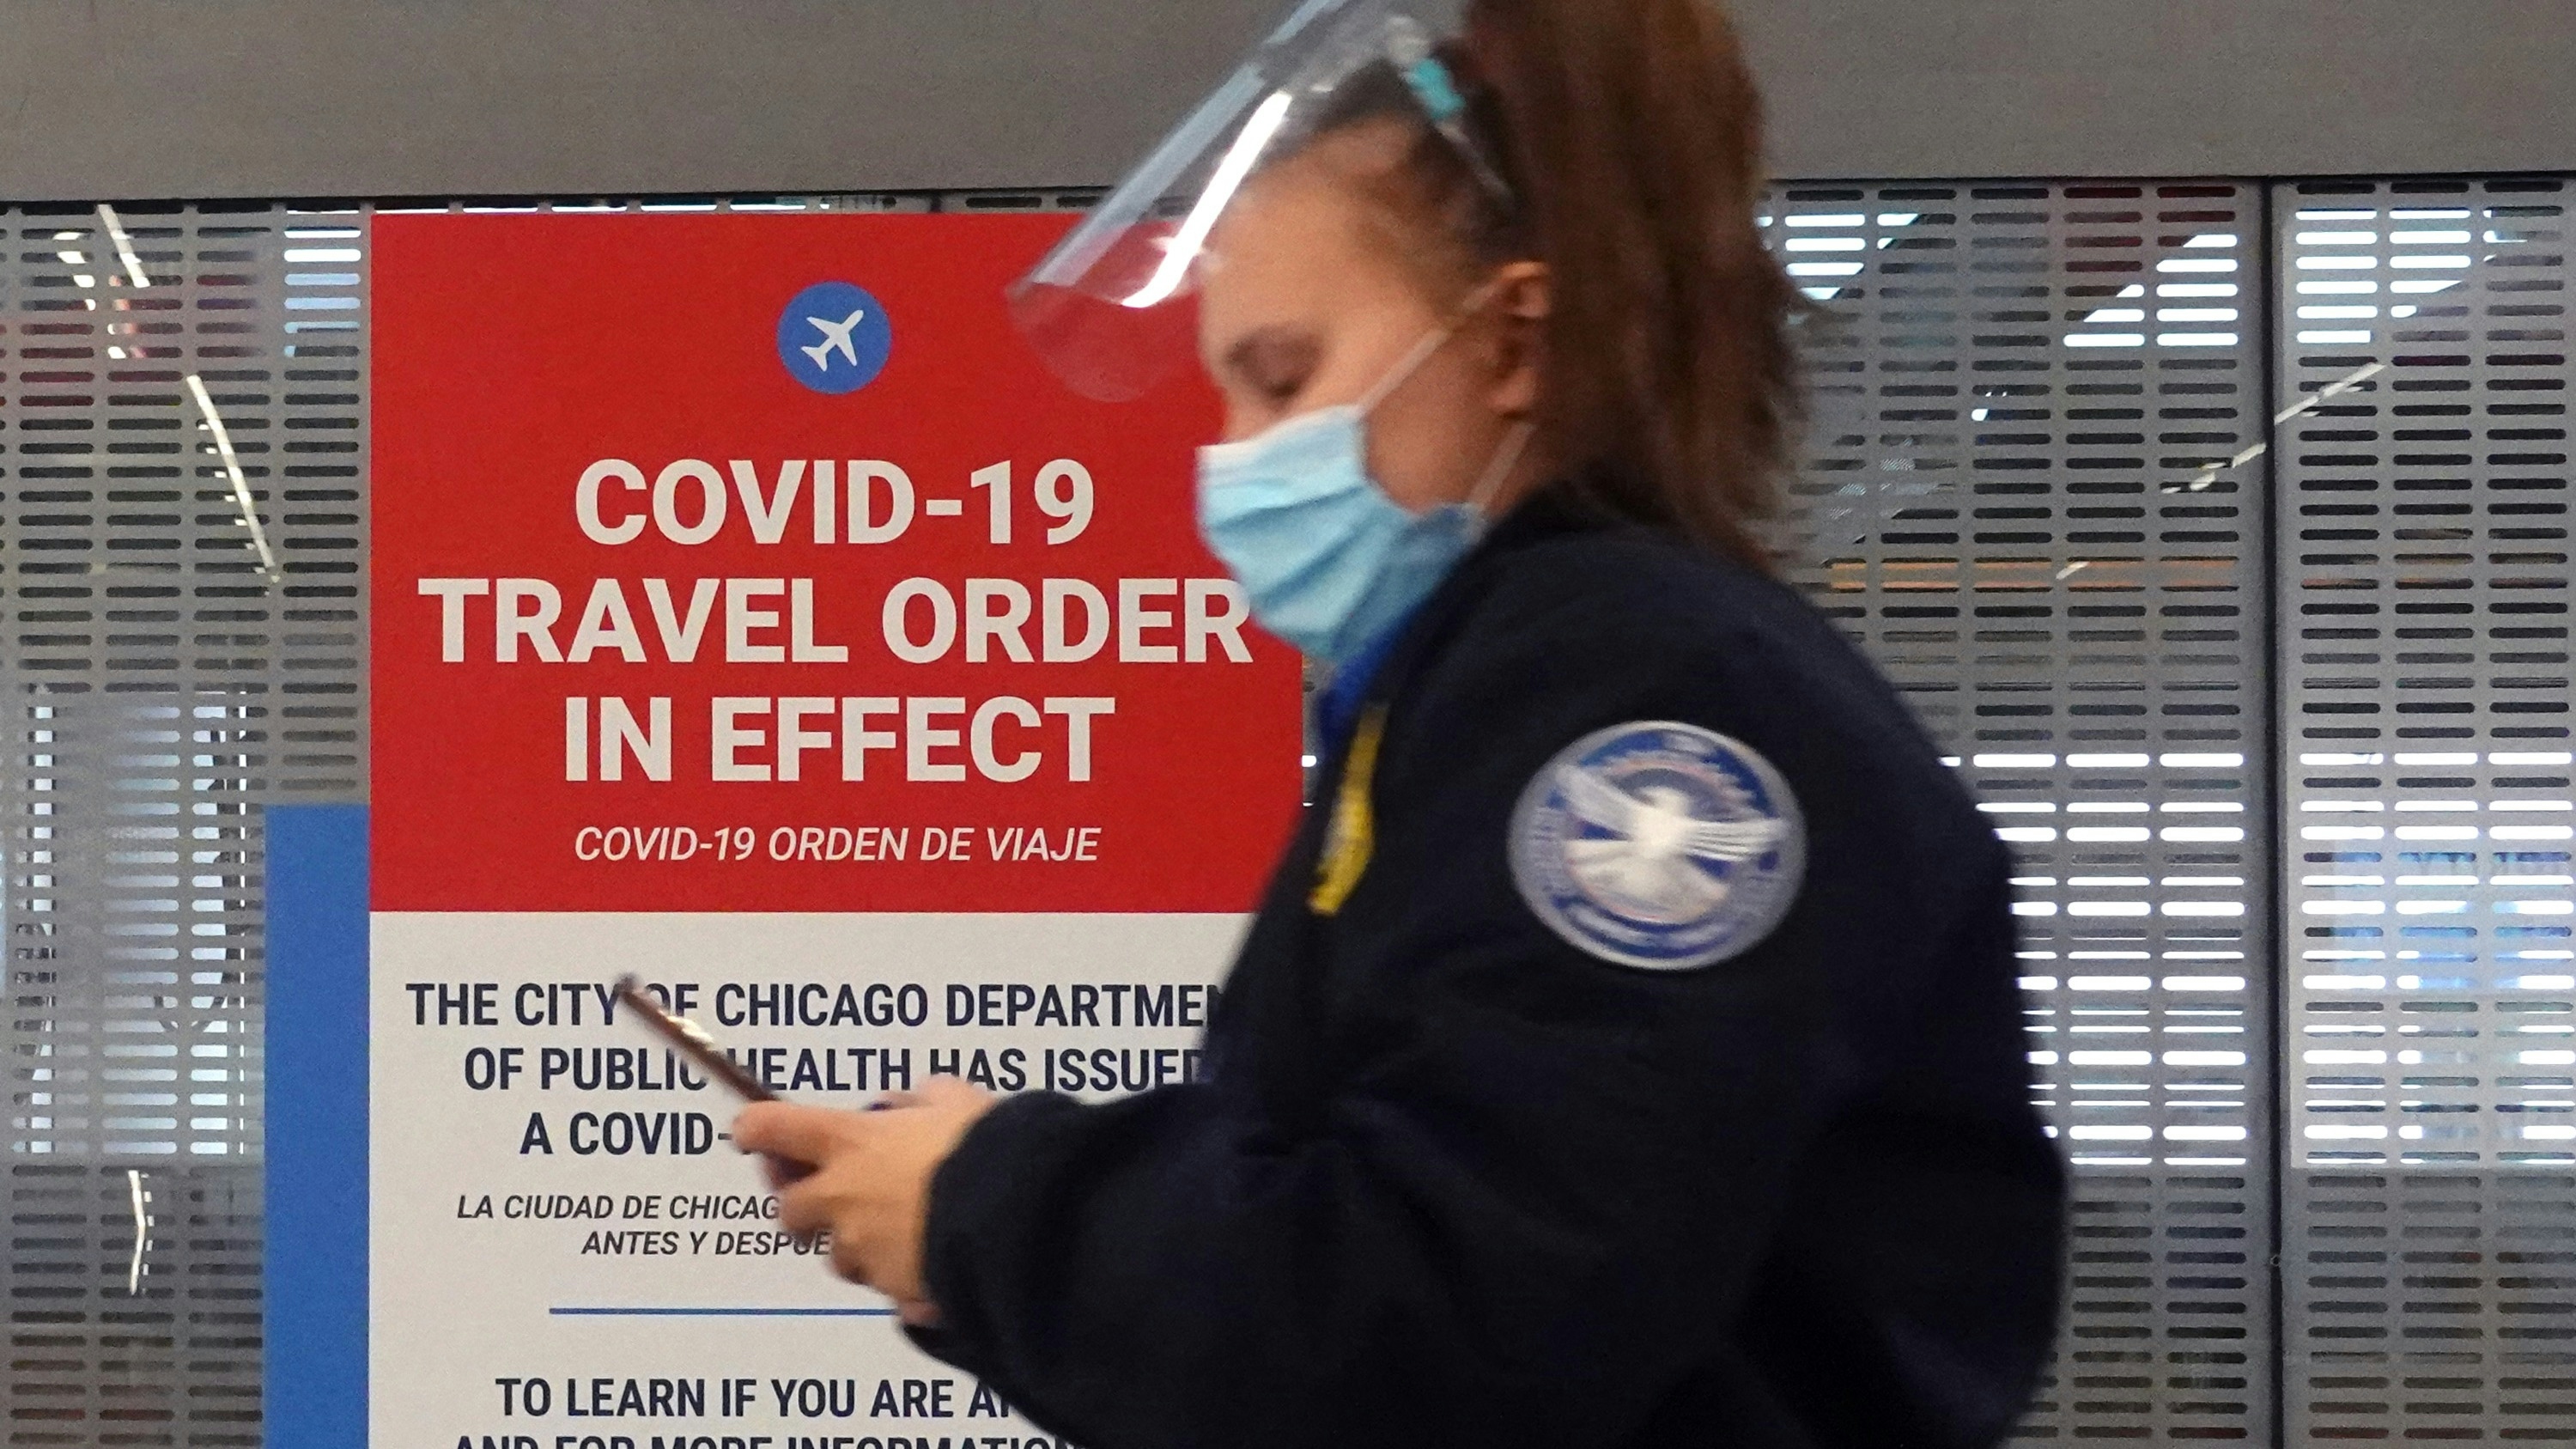 A warning for travelers flying during the pandemic is posted at O'Hare International Airport on November 24, 2020 in Chicago, Illinois.